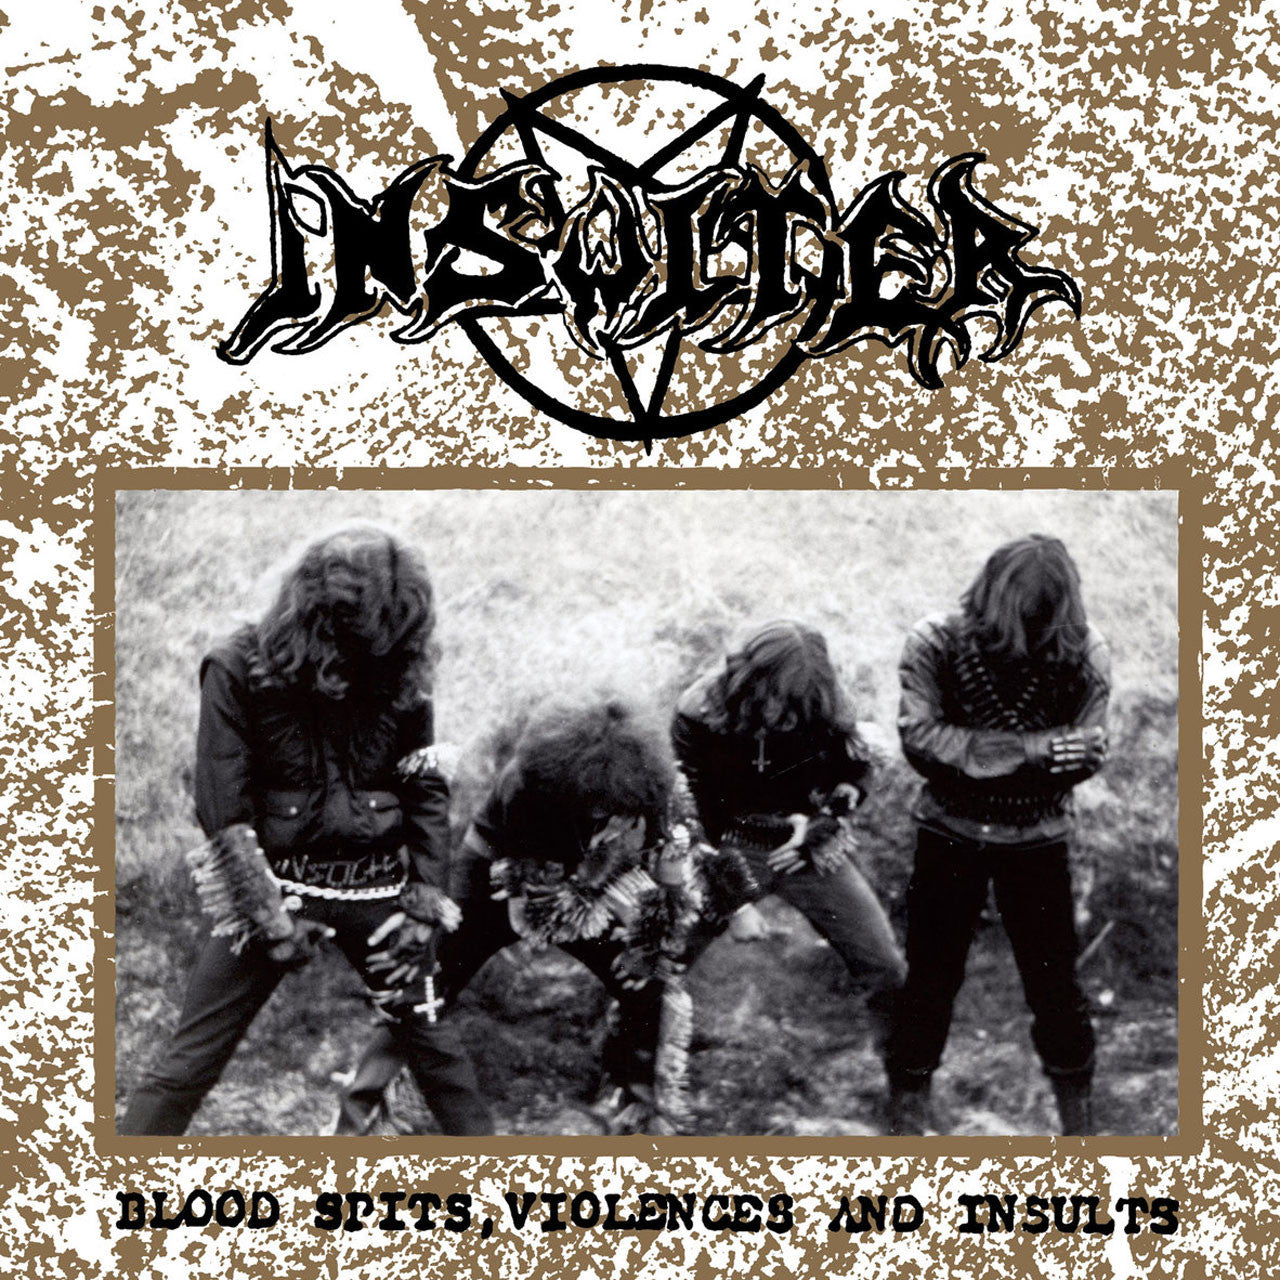 Insulter - Blood Spits, Violences and Insults (CD)